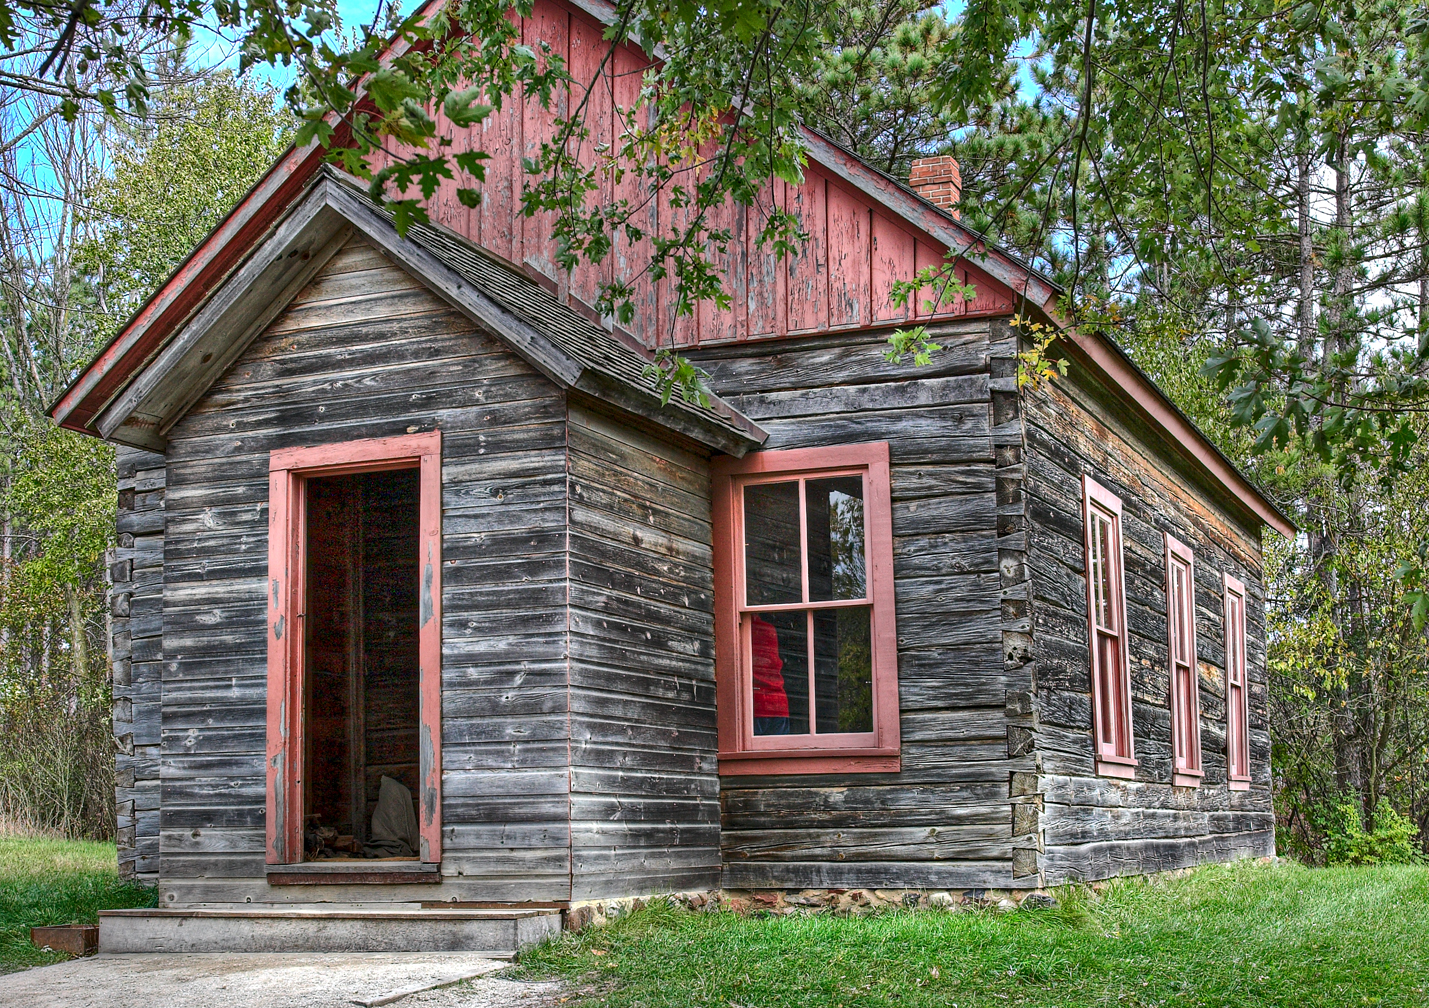 An image of the raspberry school at Old World Wisconsin